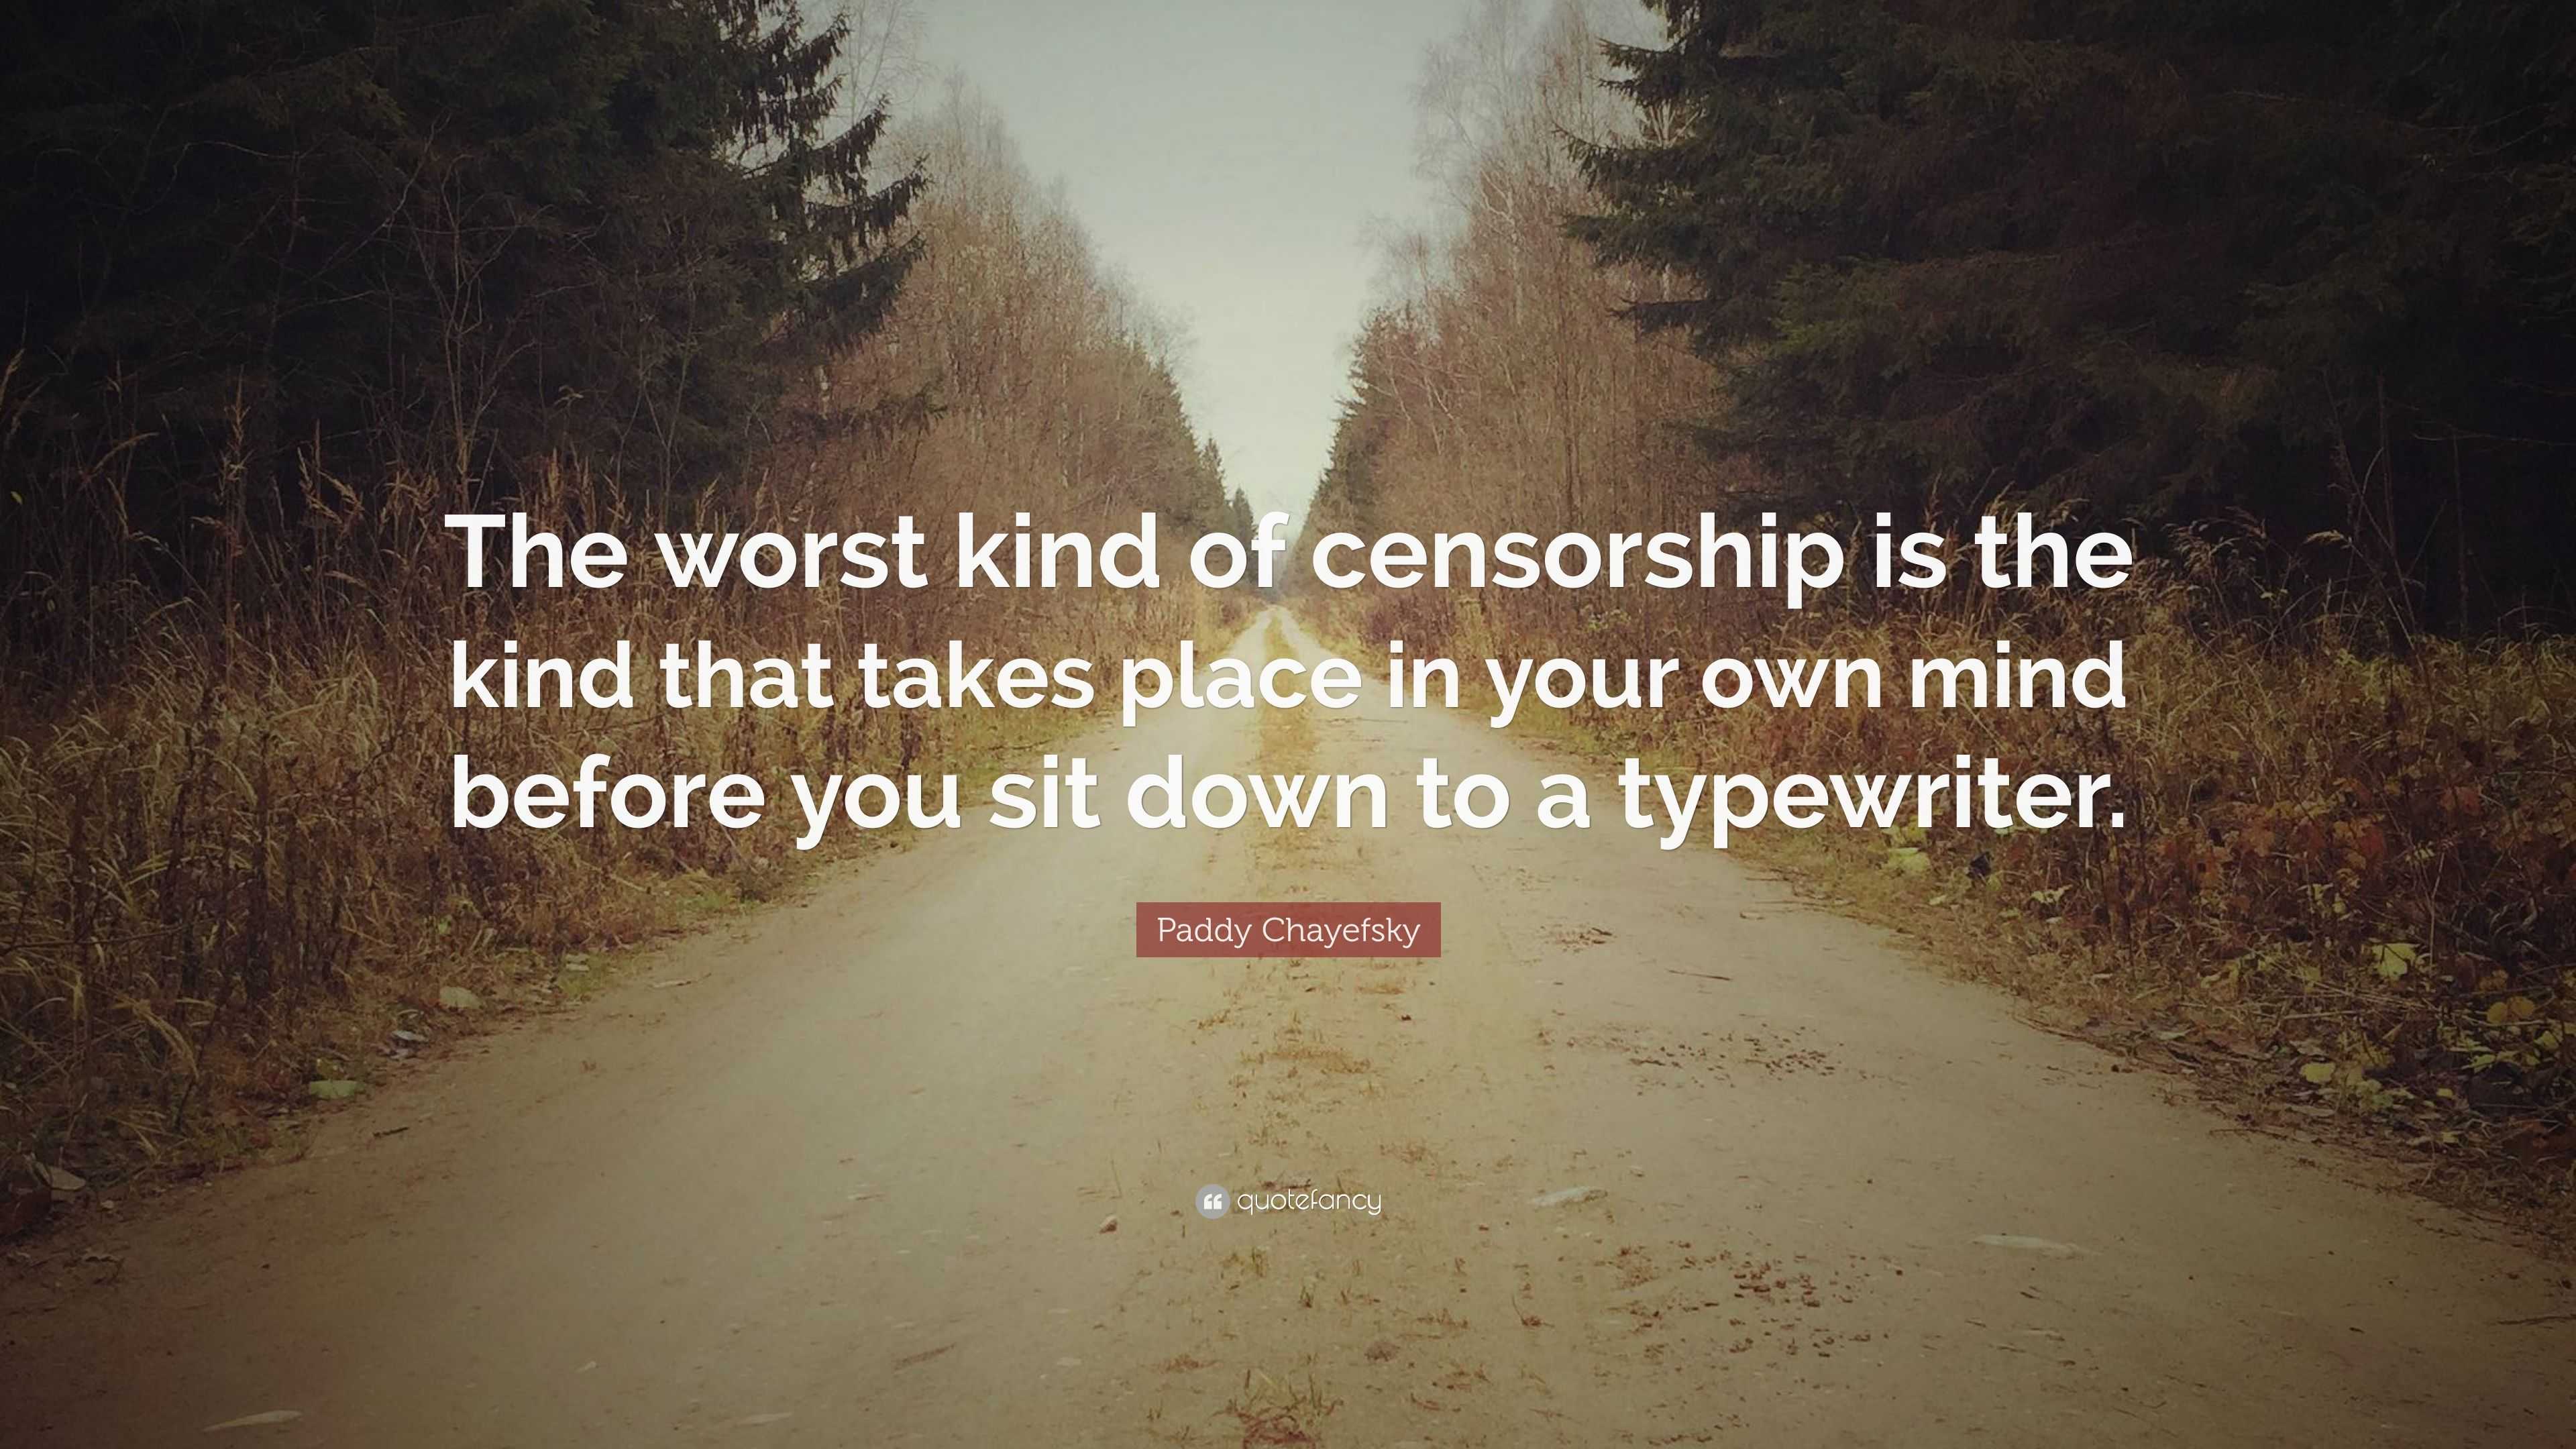 Paddy Chayefsky Quote “the Worst Kind Of Censorship Is The Kind That Takes Place In Your Own